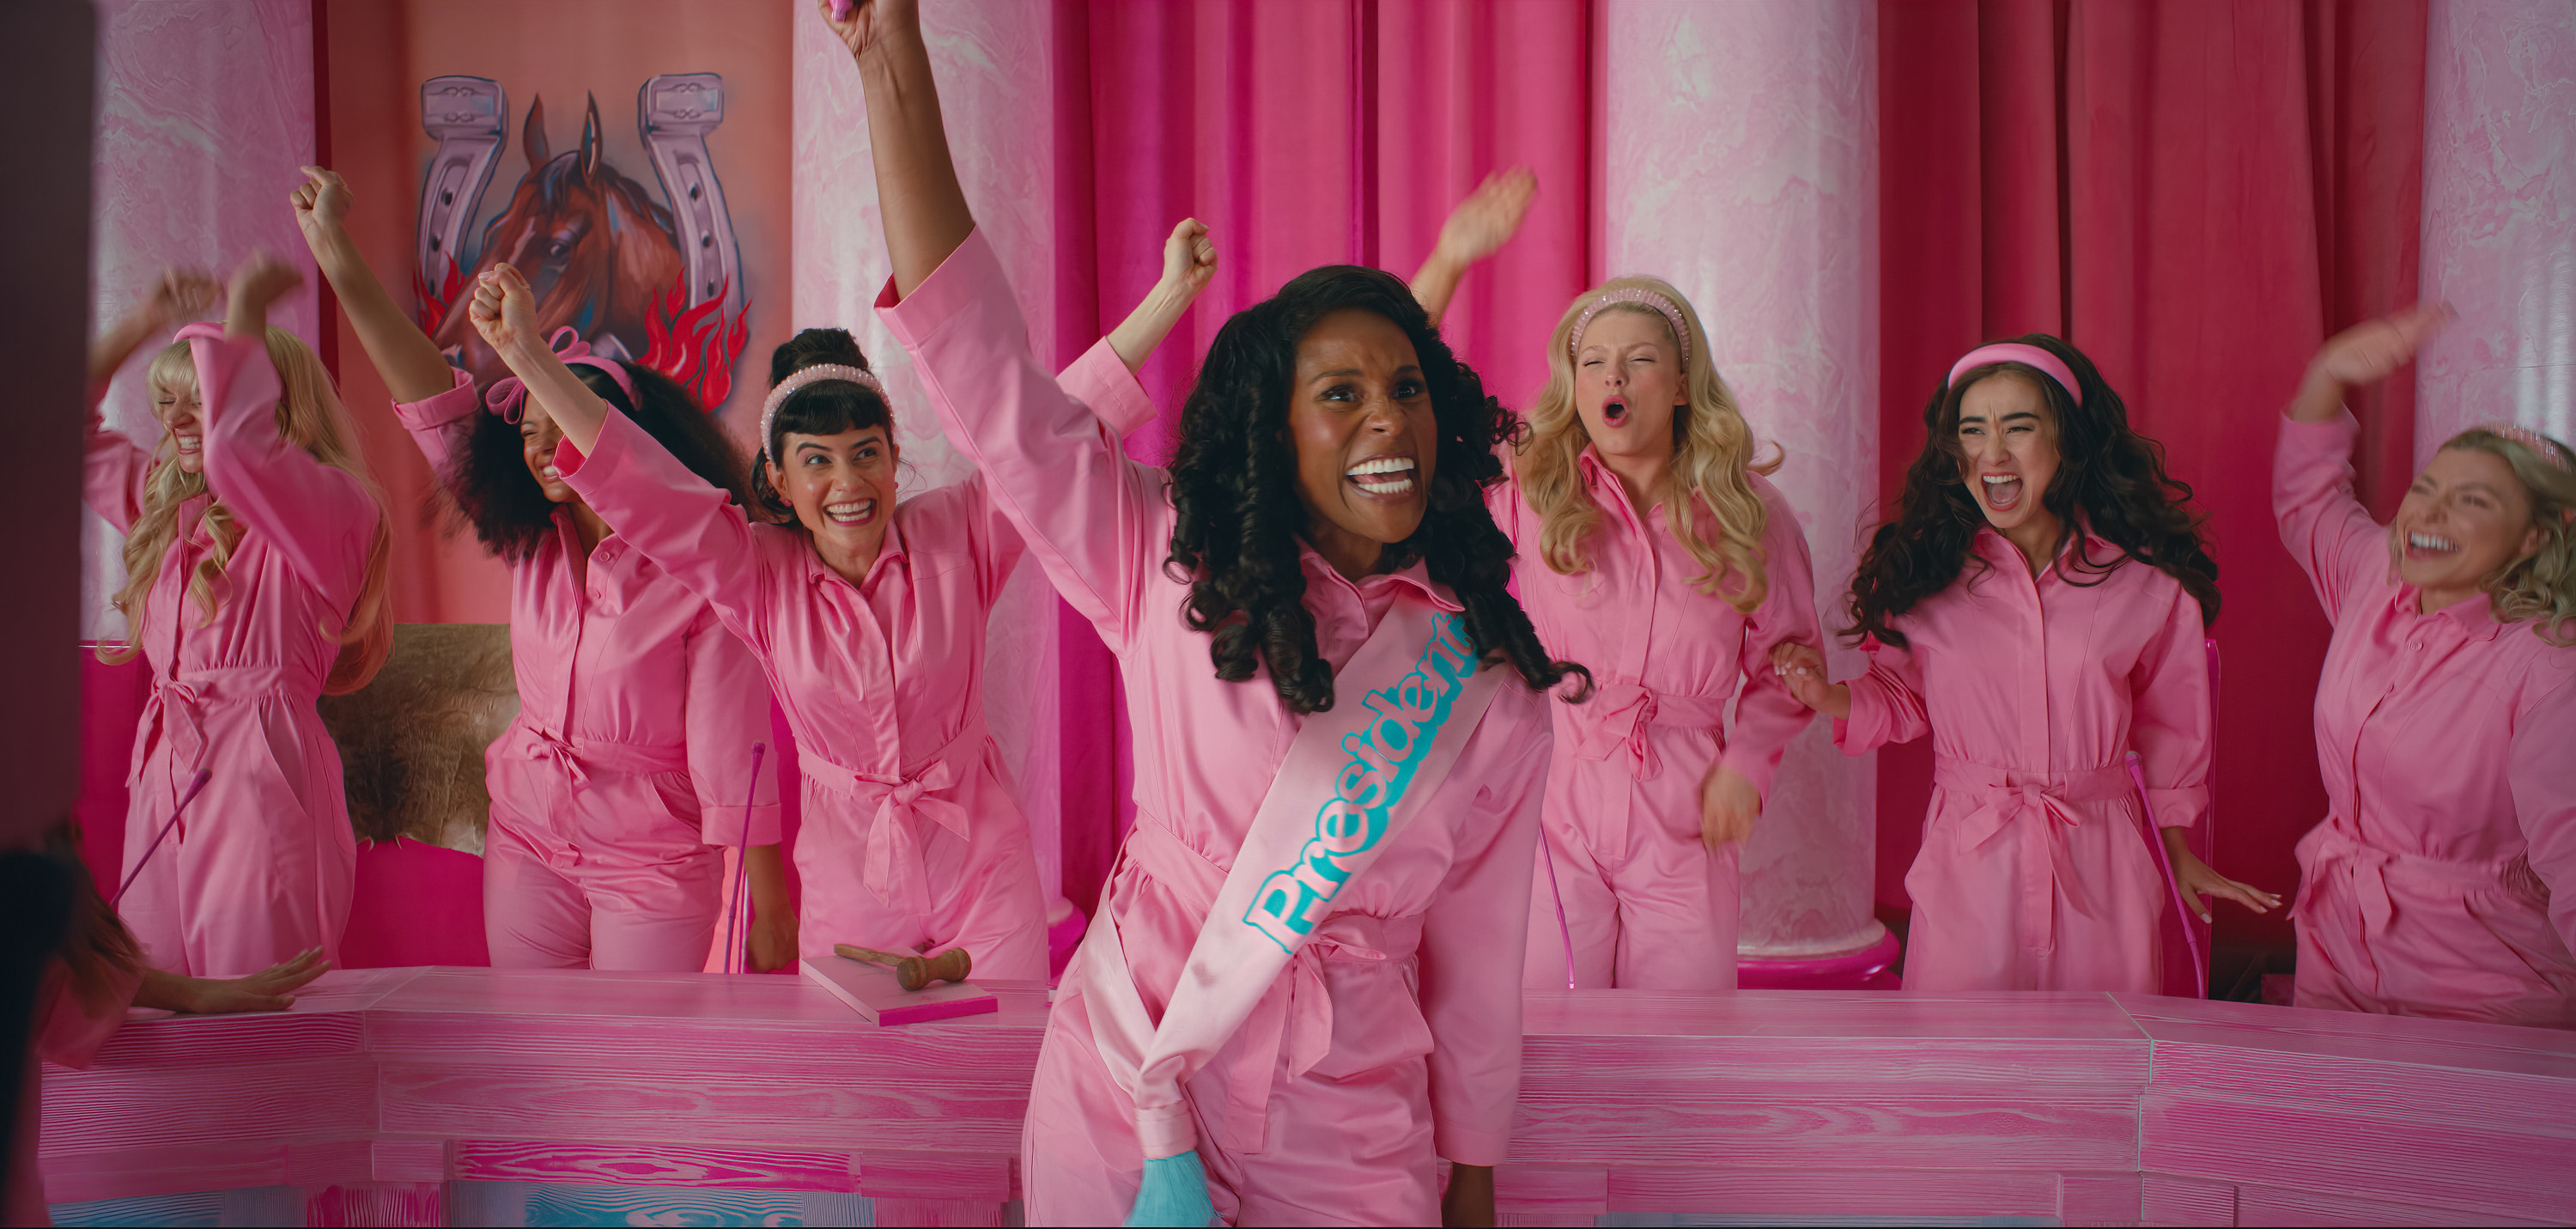 Issa Rae as Barbie riling up a crowd of people all wearing matching Barbie pink jumpsuits